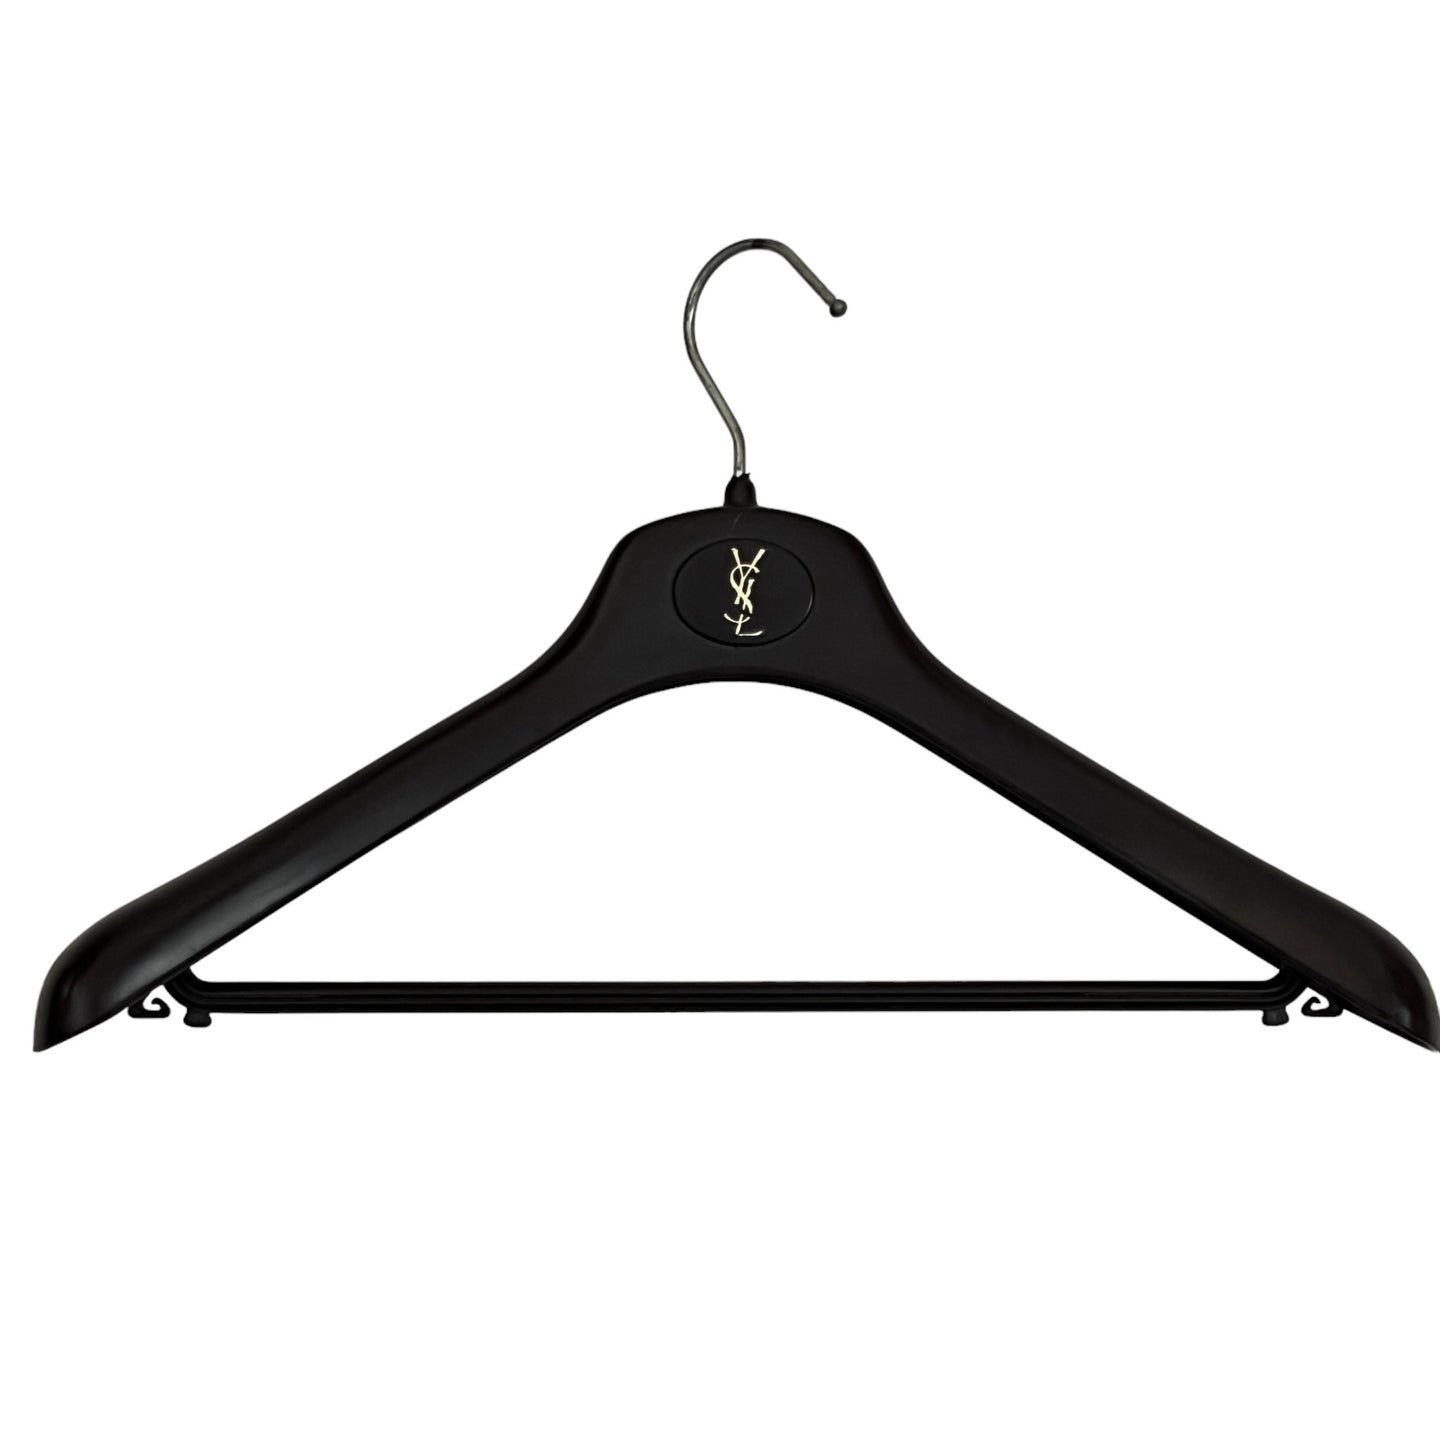 Yves Saint Laurent Clothes Hanger Sturdy Plastic Metal Hook Gold Logo Made Italy